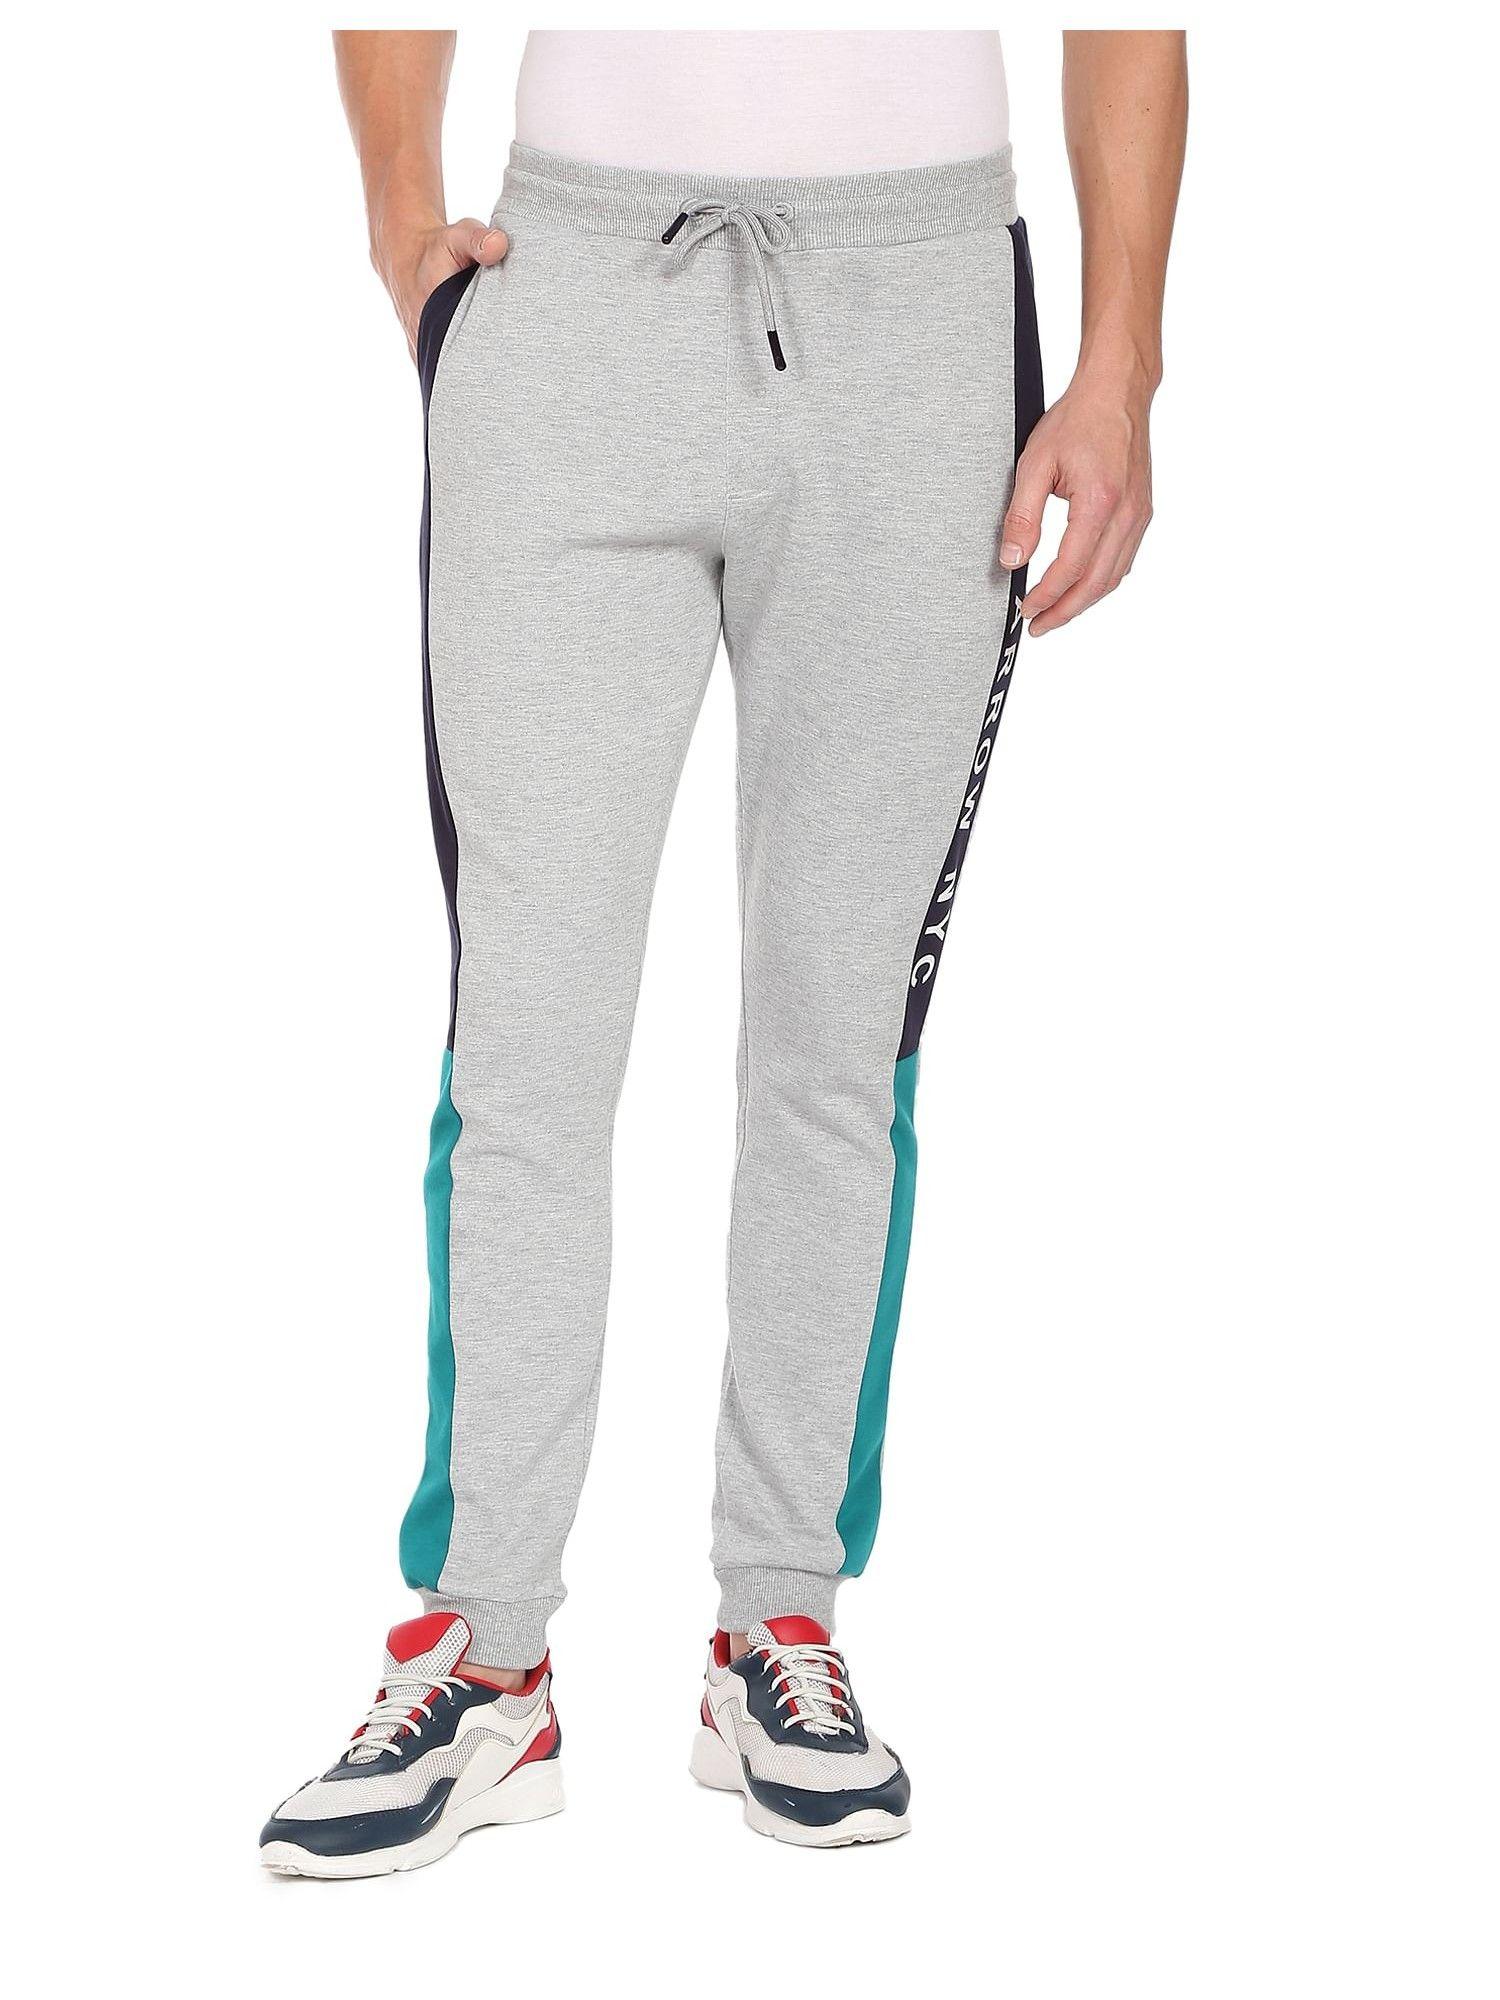 sports knit cut and sew joggers